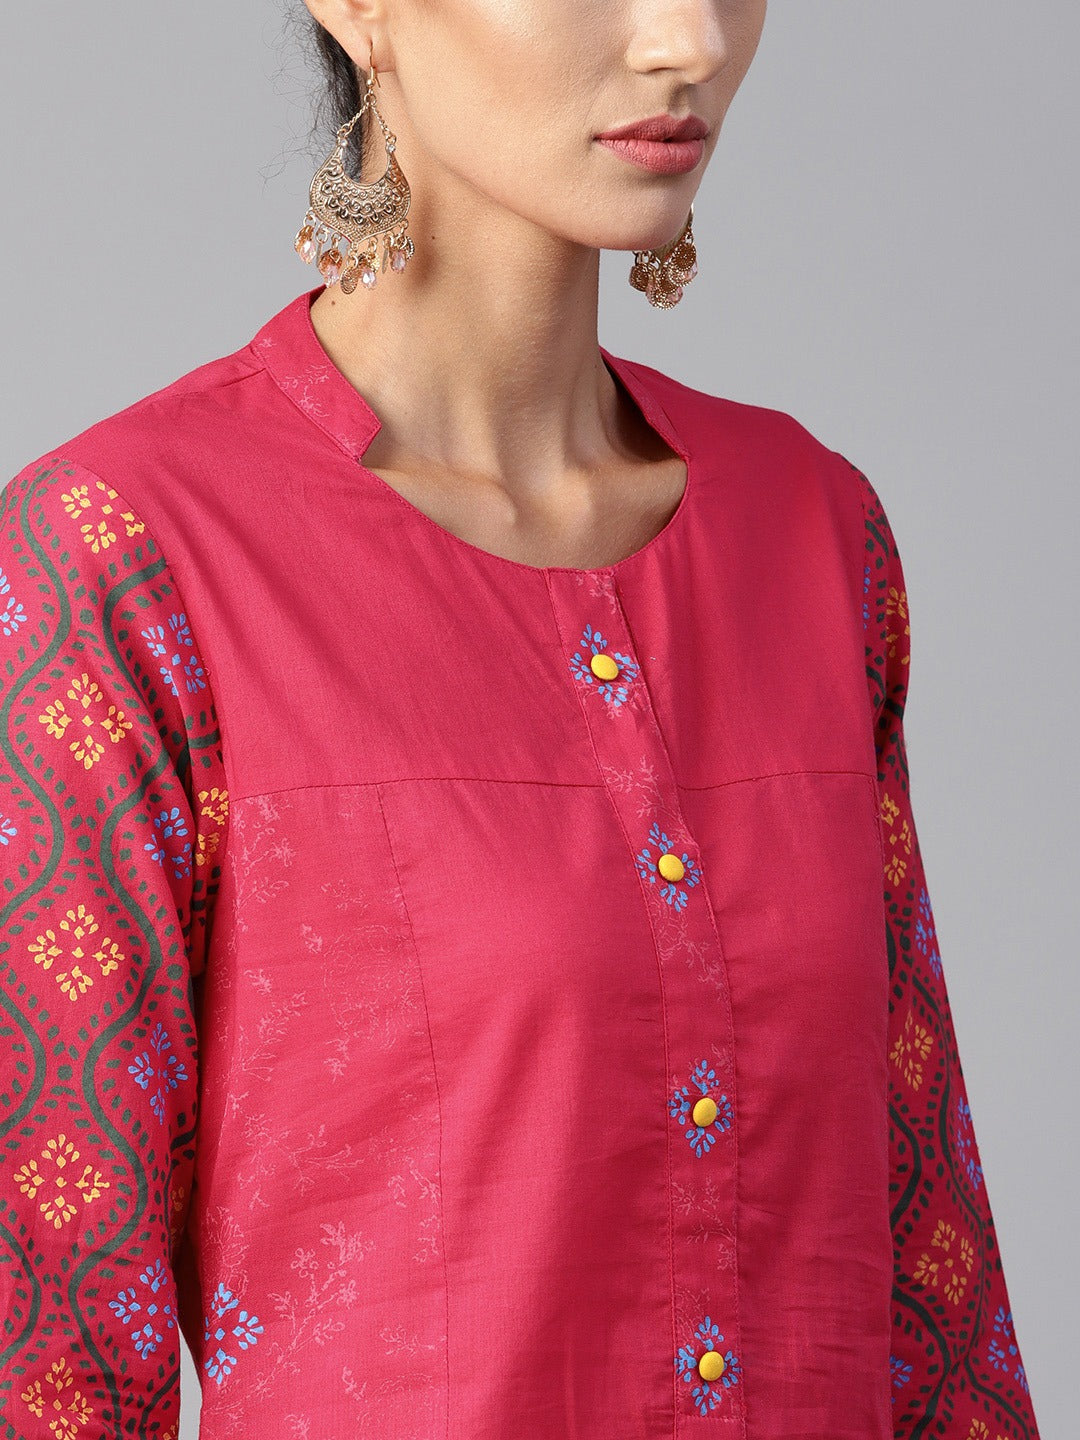 Women Pink and blue printed kurta with trousers - NOZ2TOZ